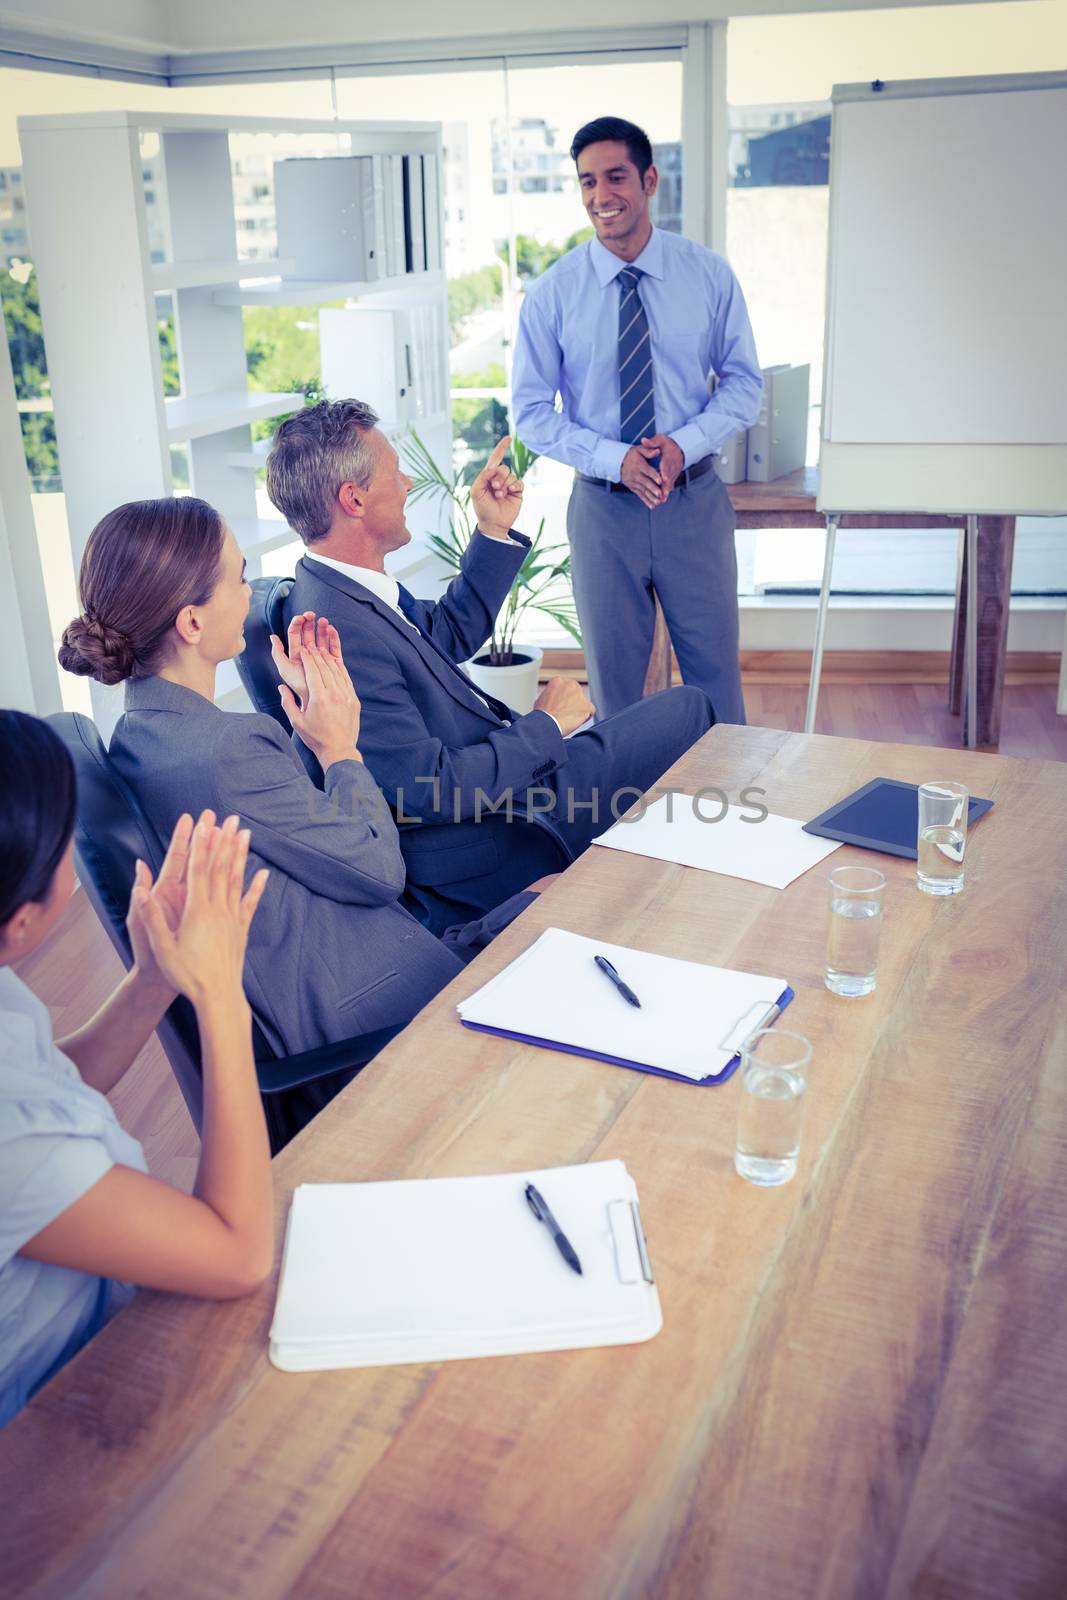 Business people applauding during a meeting in the office